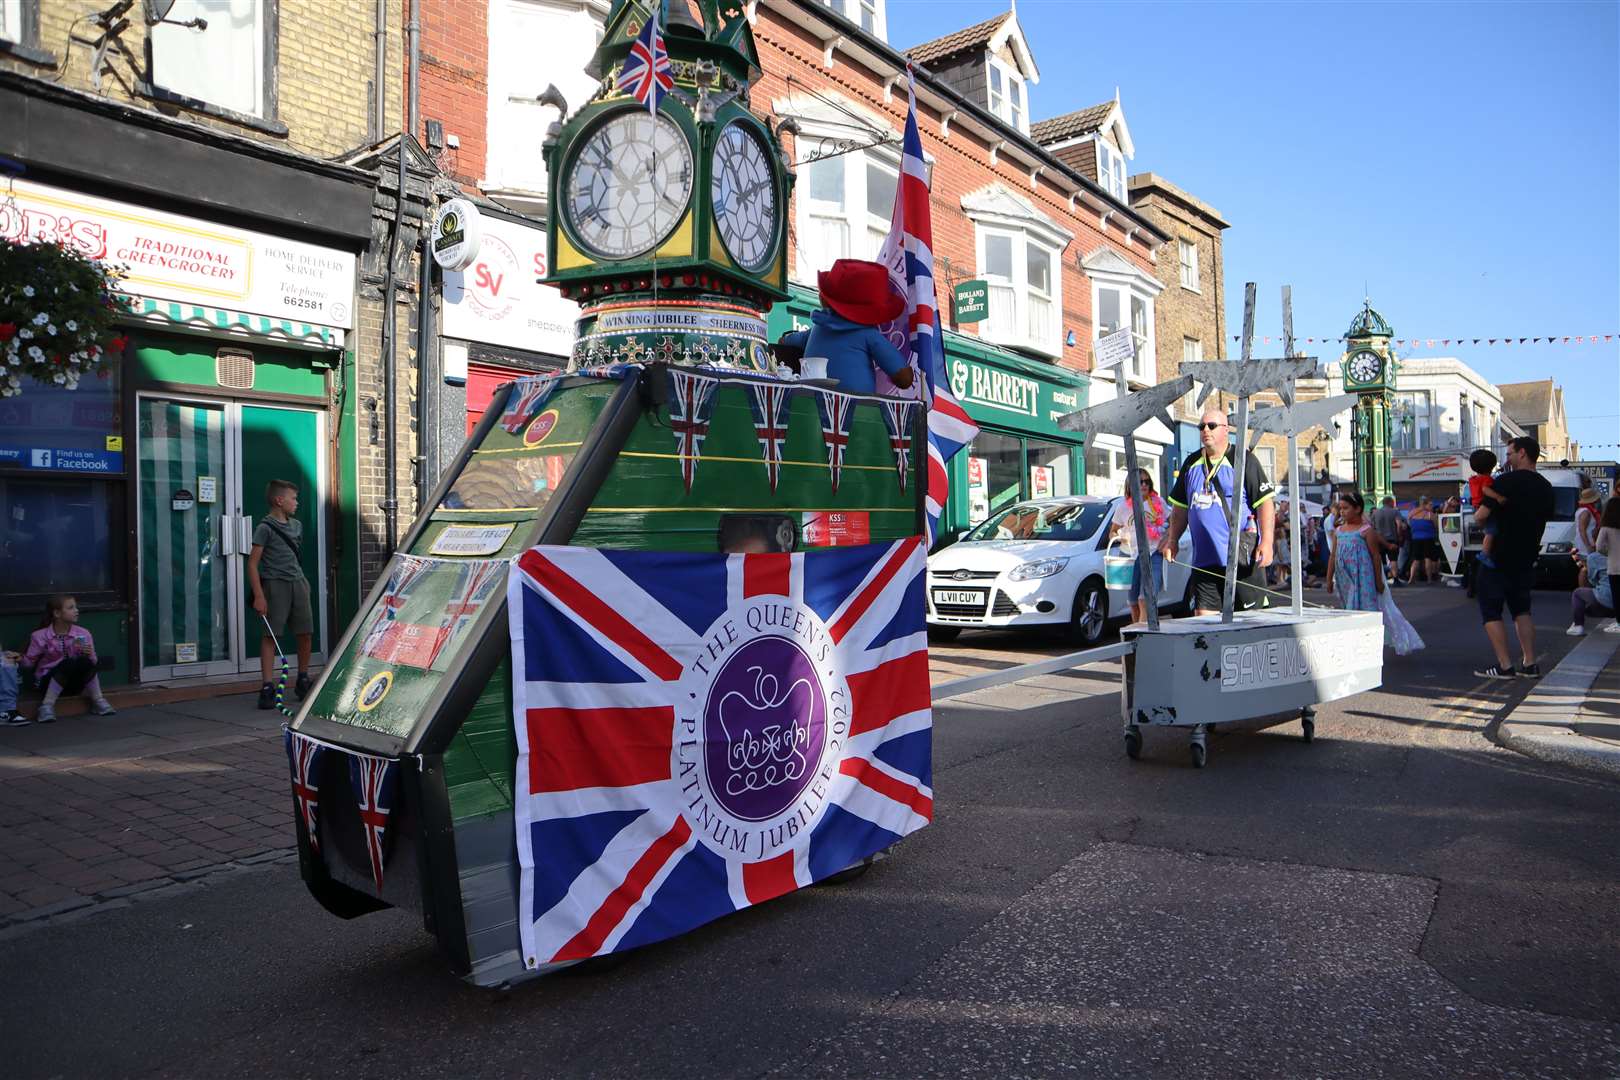 Tim Bell's replica Sheerness clock tower turned heads as it took part in the Sheppey summer carnival on Saturday towing a replica of the SS Richard Montgomery bomb ship followed by a snow-spouting Kent air ambulance helicopter